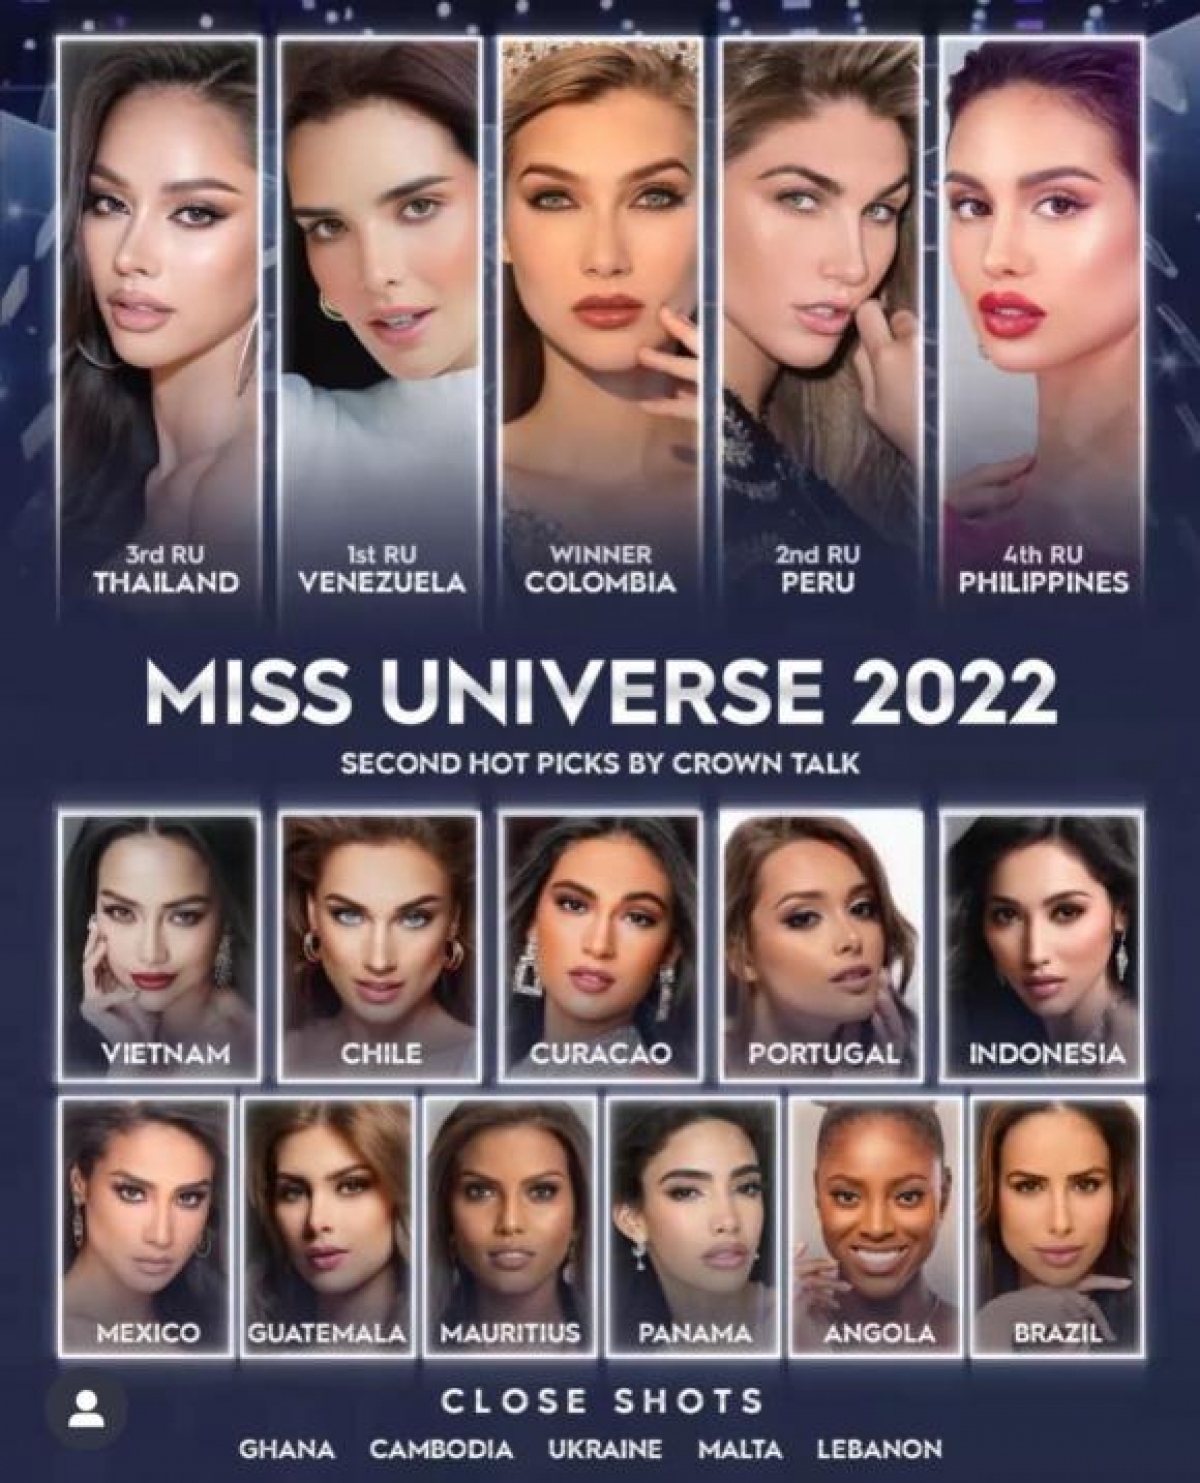 ngoc chau anticipated to make top 6 of miss universe 2022 picture 1